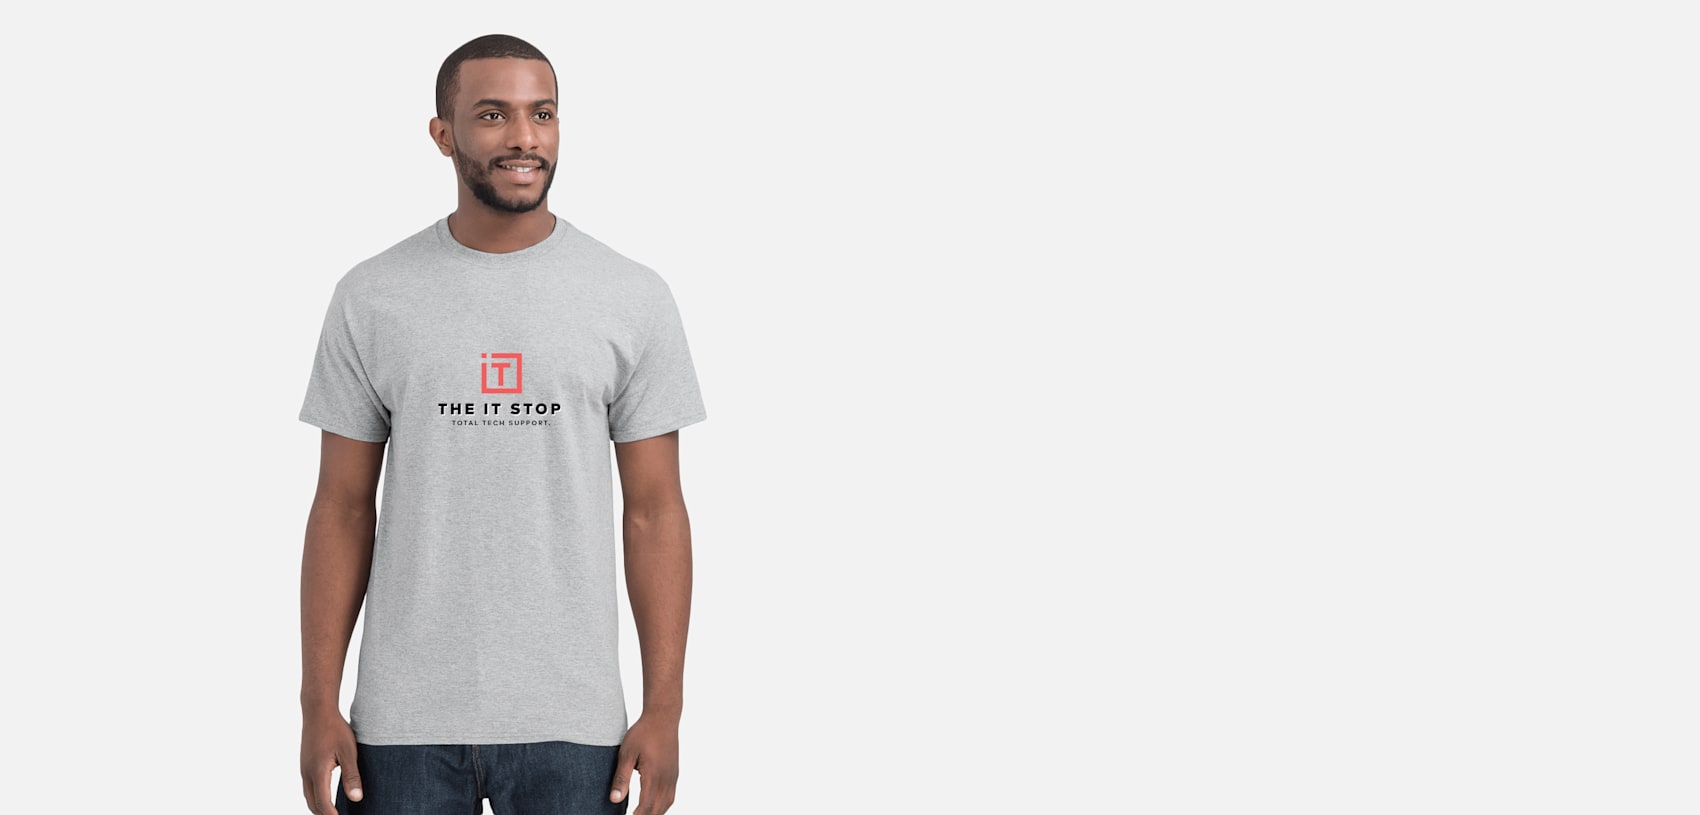 Men's premium tee shirt,customiseable with your name or logo,